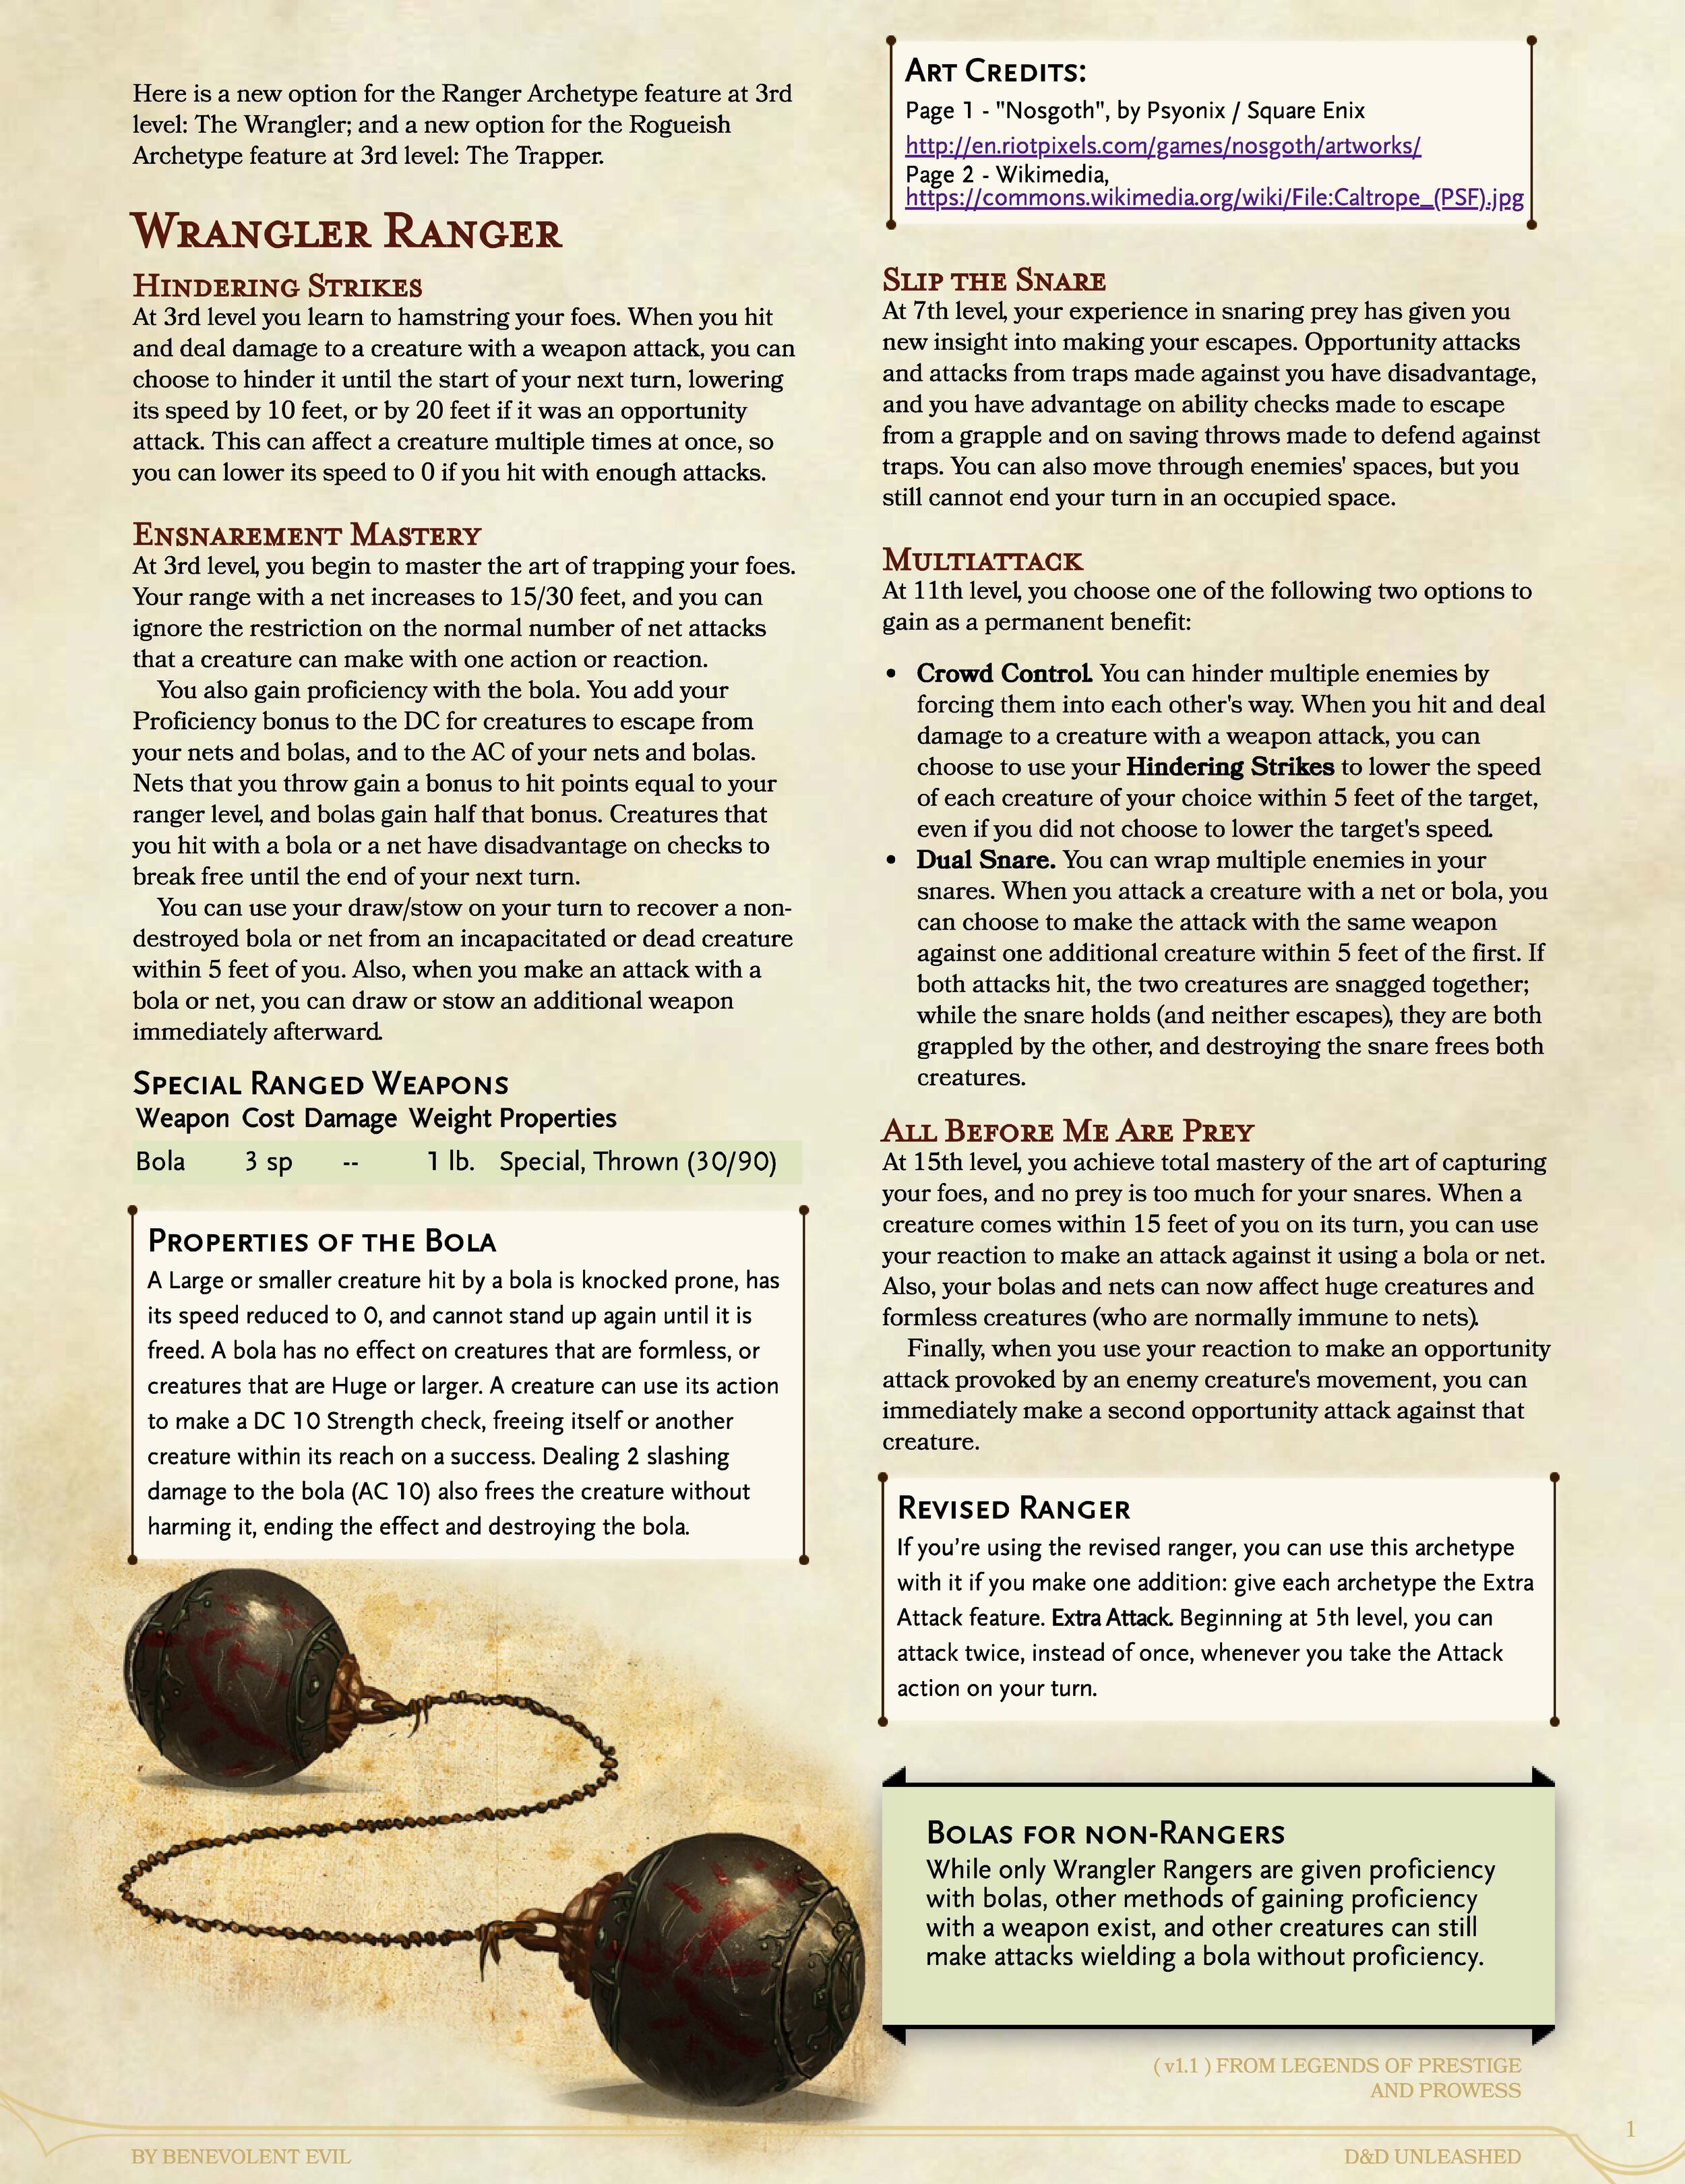 Wrangler Ranger And Trapper Rogue — Dnd Unleashed A Homebrew Expansion For 5th Edition Dungeons